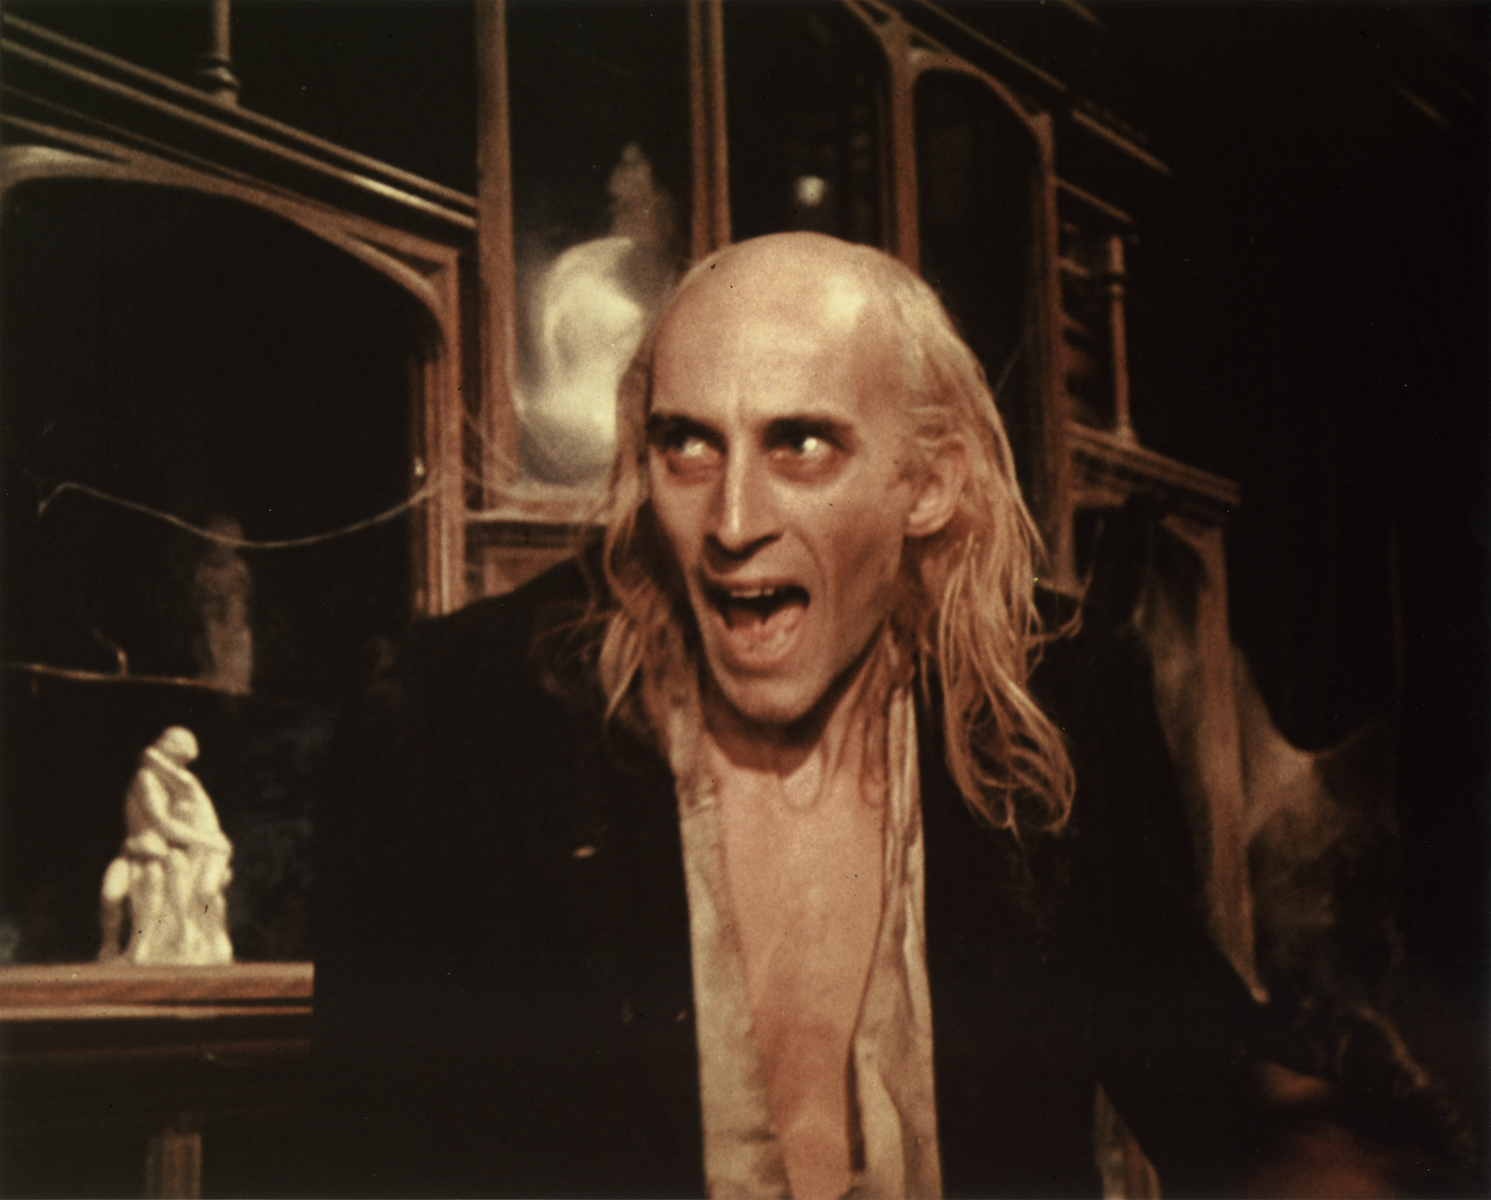 Richard O'Brien as Riff-Raff in <i>The Rocky Horror Picture Show</i> (1975)